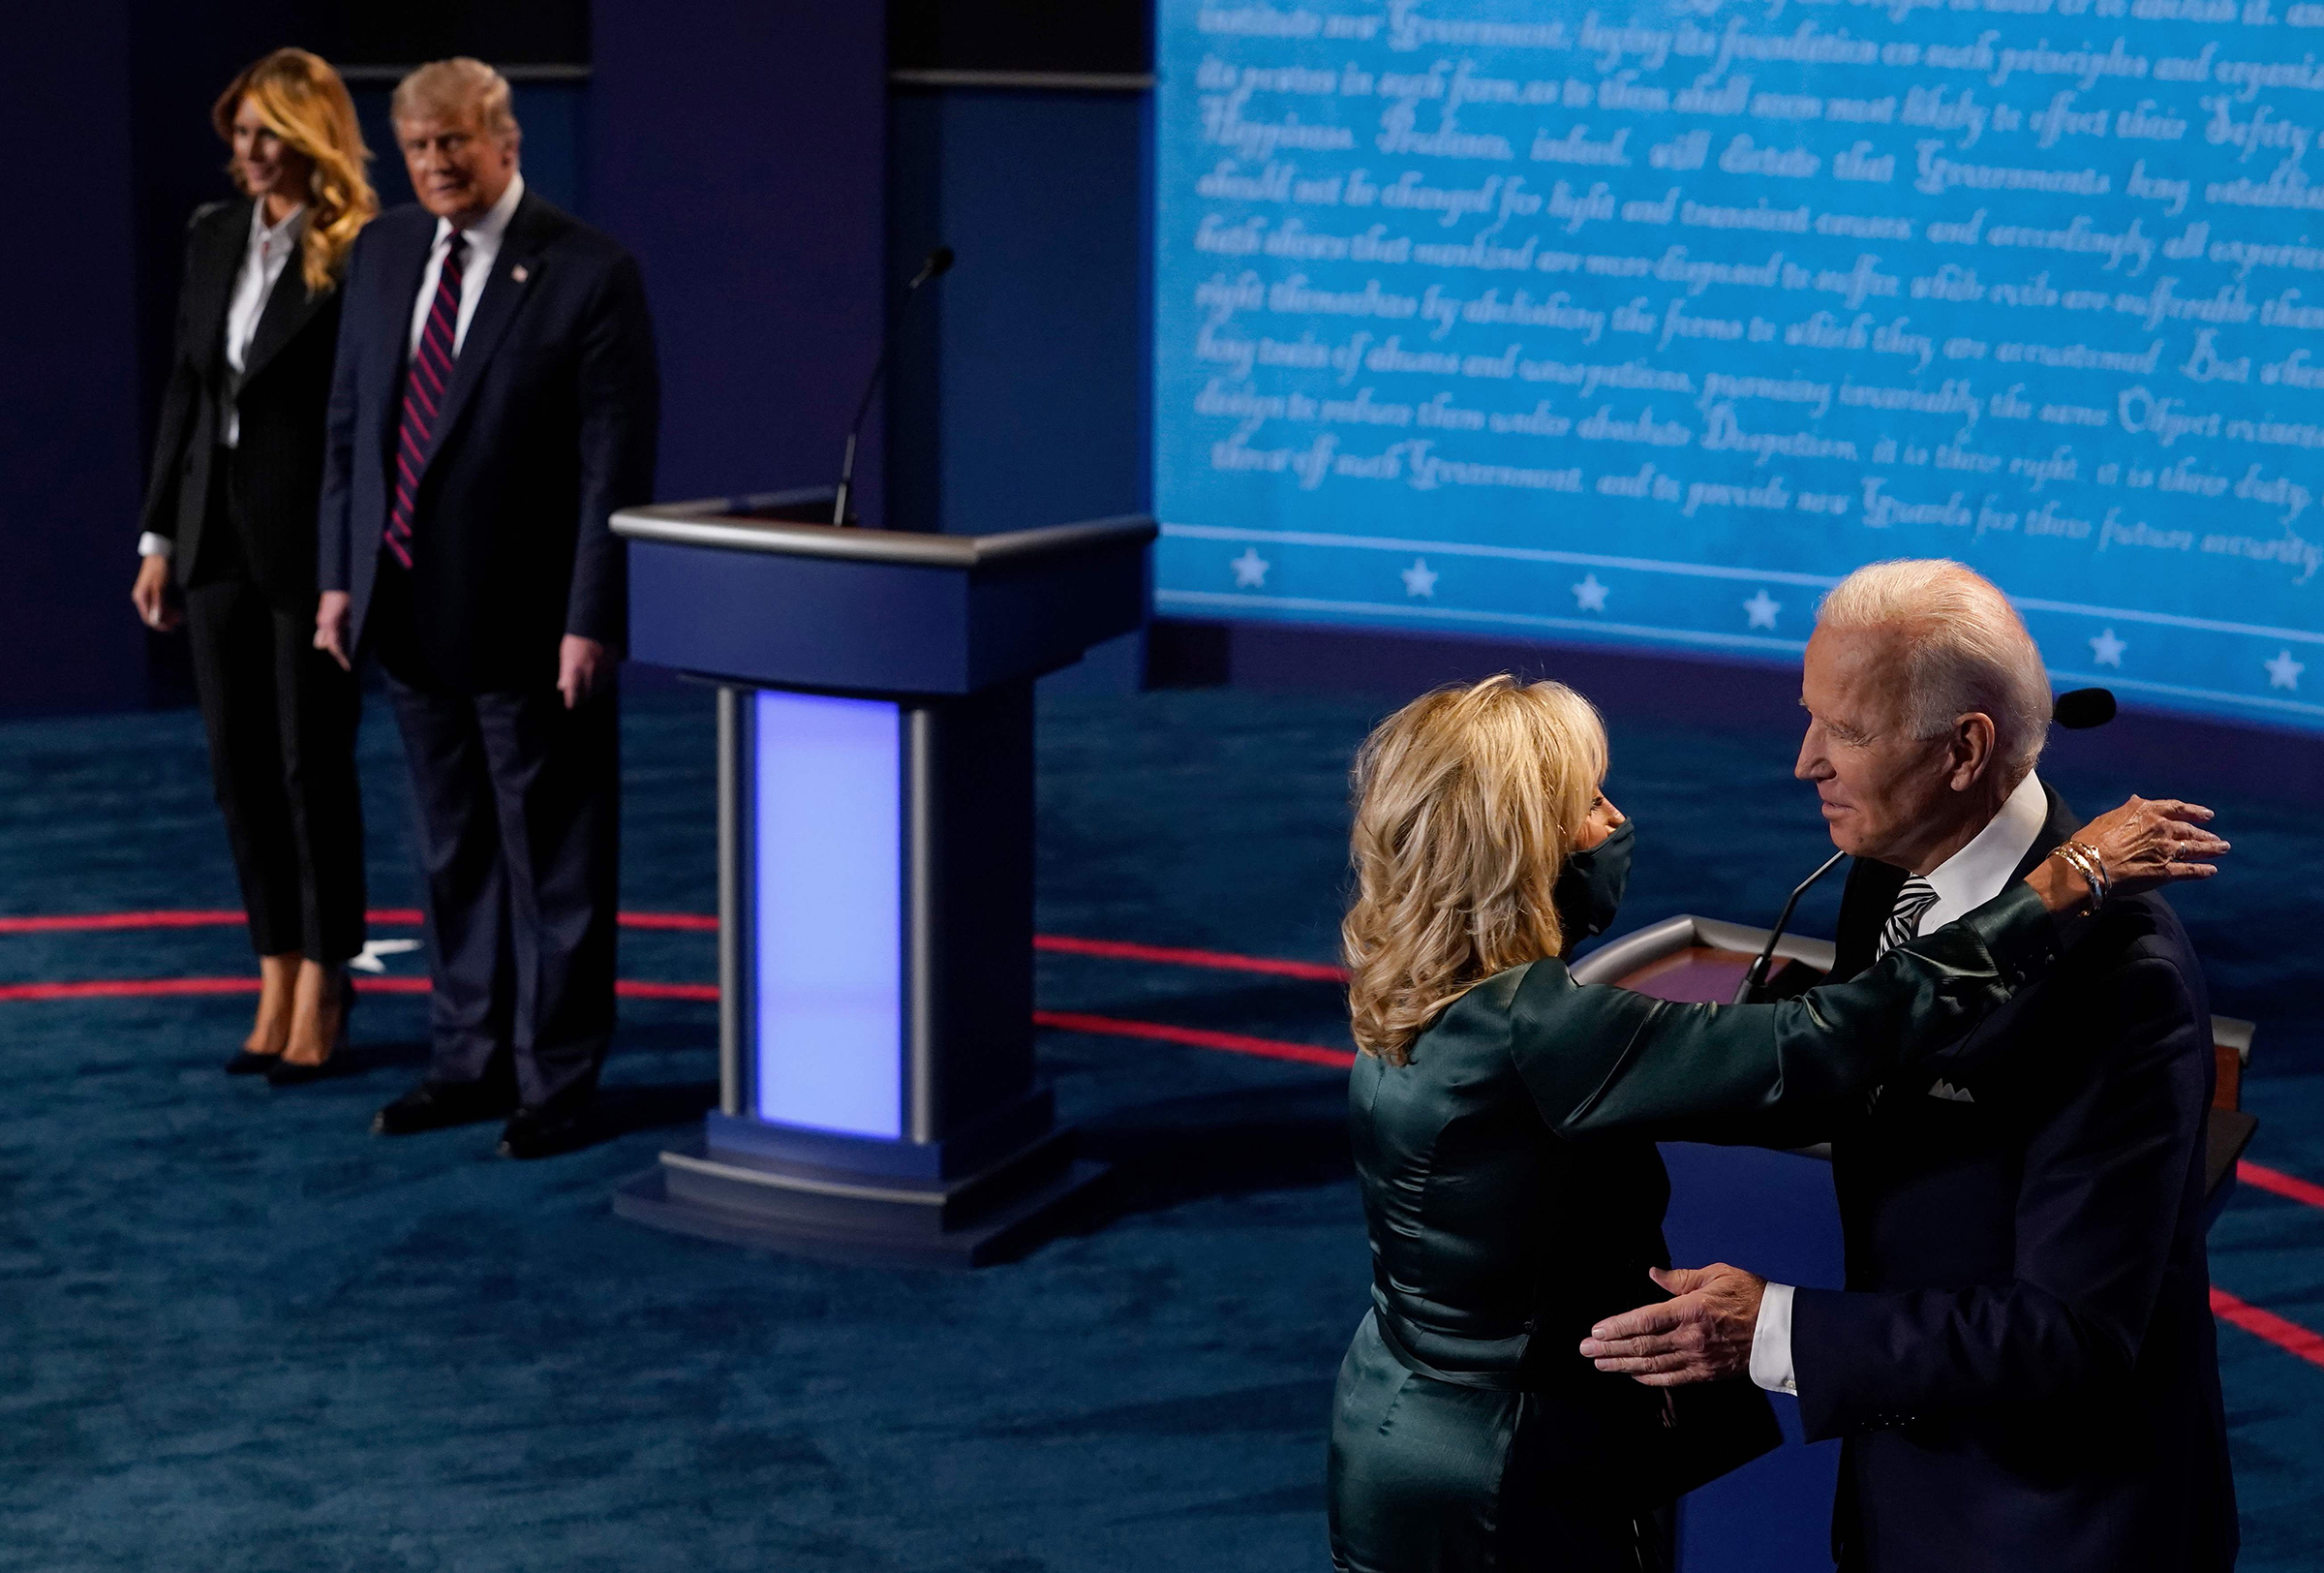 First Lady Melania Trump and President Donald Trump look on as Democratic presidential candidate and former Vice President Joe Biden hugs his wife, Jill Biden, after the first presidential debate in Cleveland on Sept. 29, 2020.